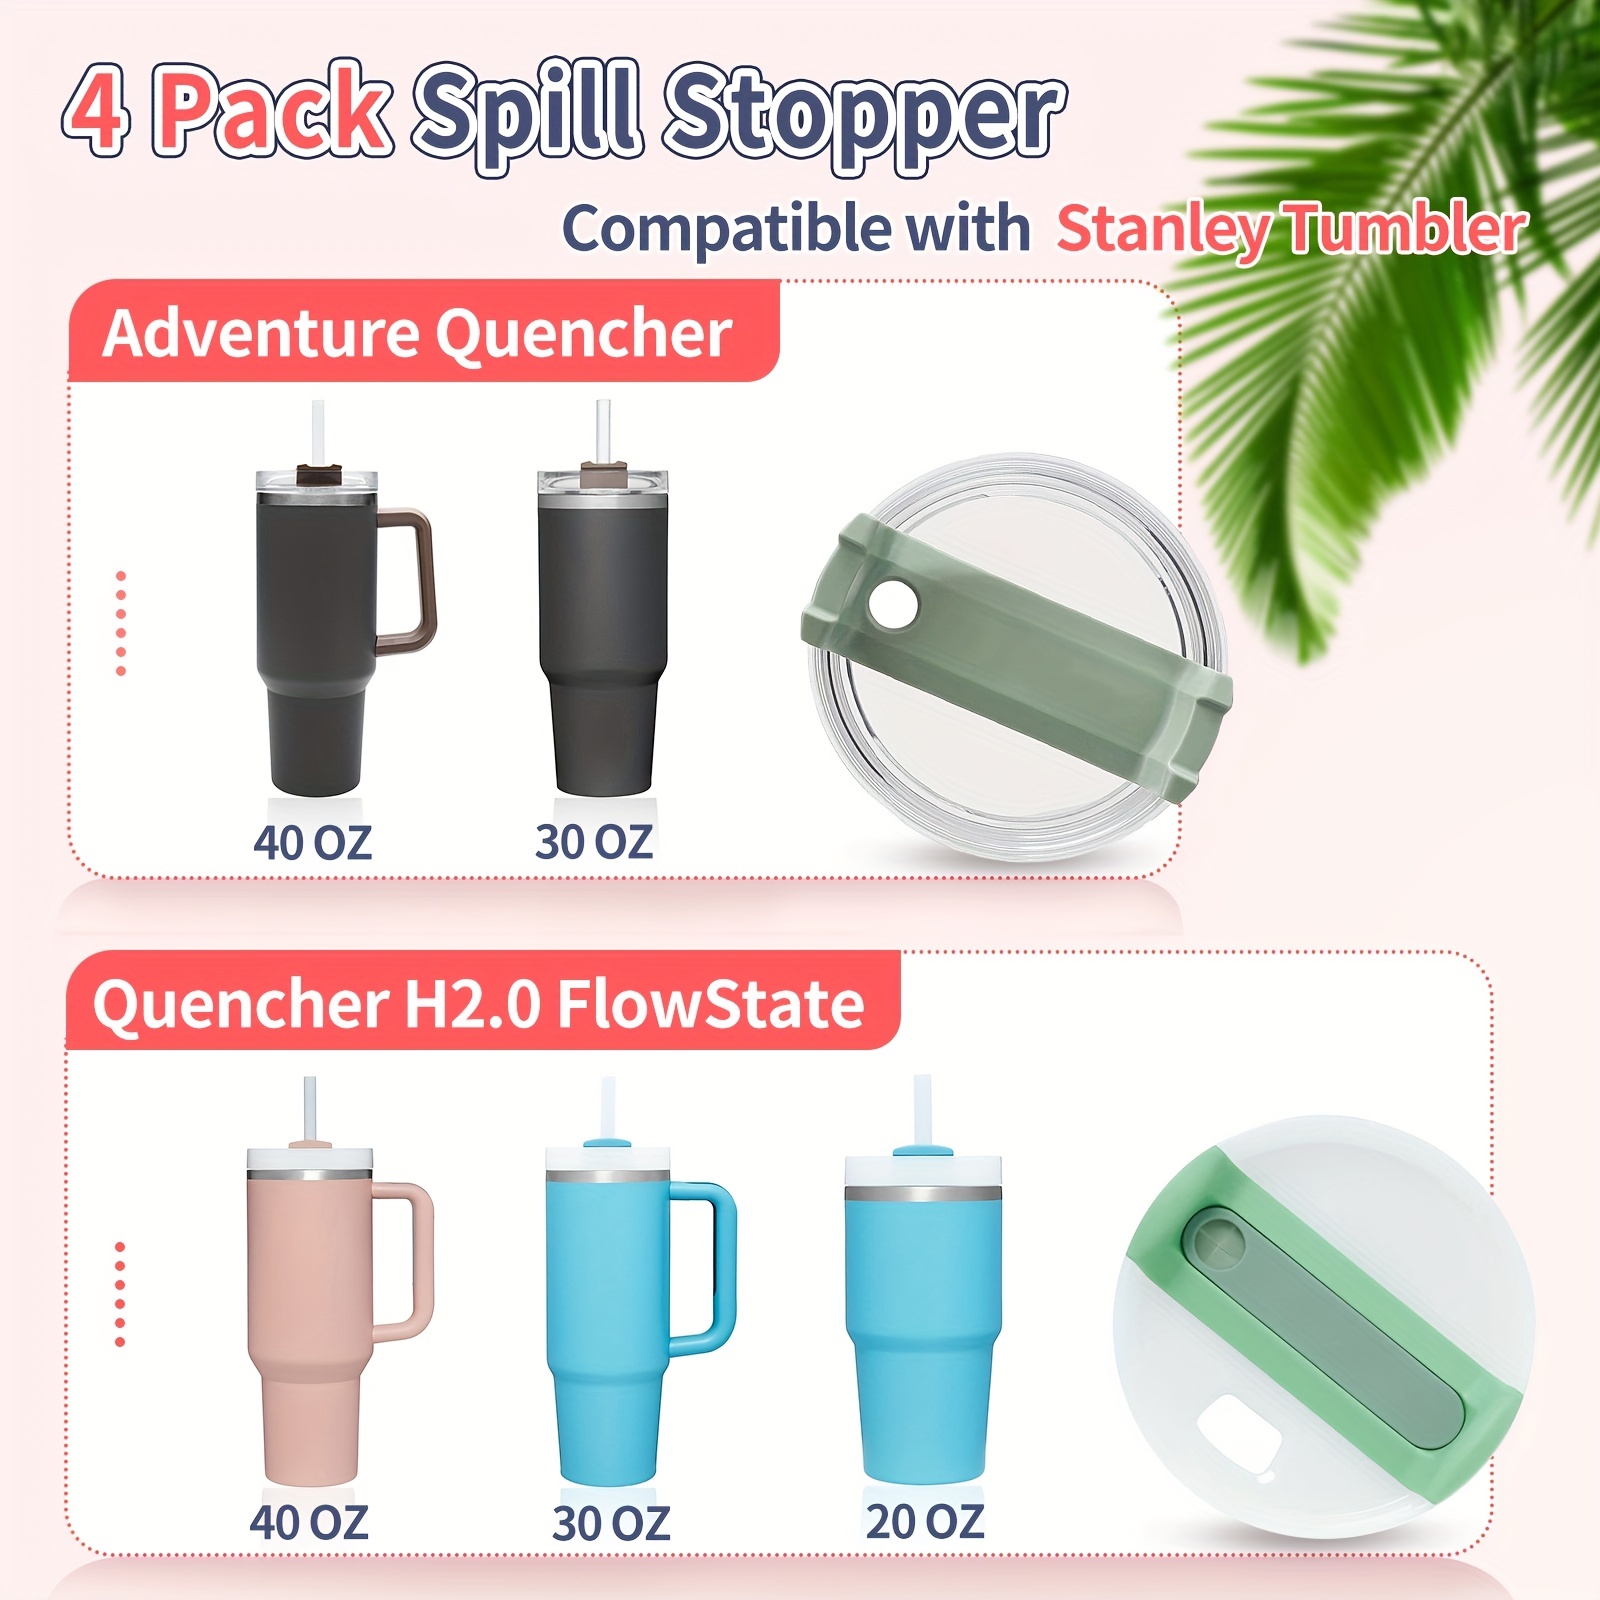 8pcs Spill Proof Stoppers for Stanley Quencher Adventure Tumblers - 40 oz &  30 oz - Includes Round and Spill Proof Stoppers - Perfect for Stanley Cup